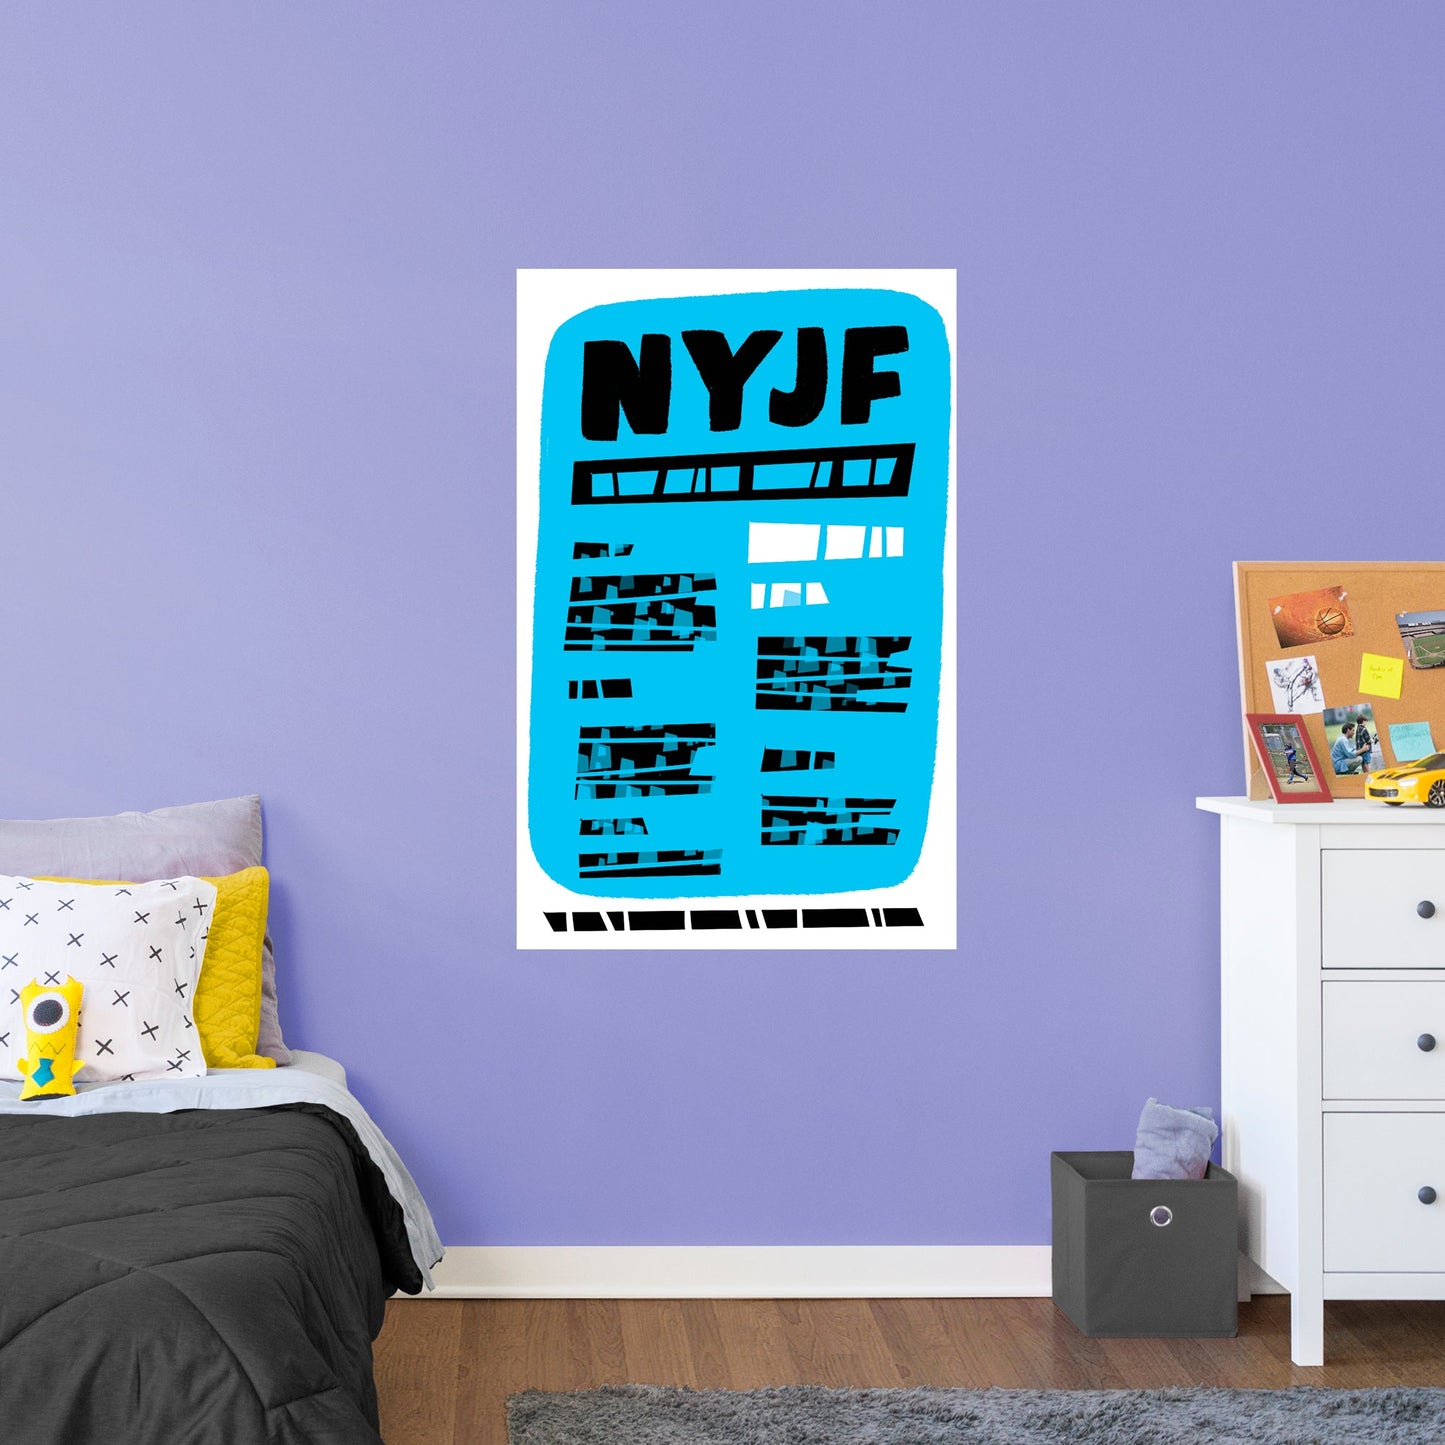 Soul Movie:  Nyjf Mural        - Officially Licensed Disney Removable Wall   Adhesive Decal